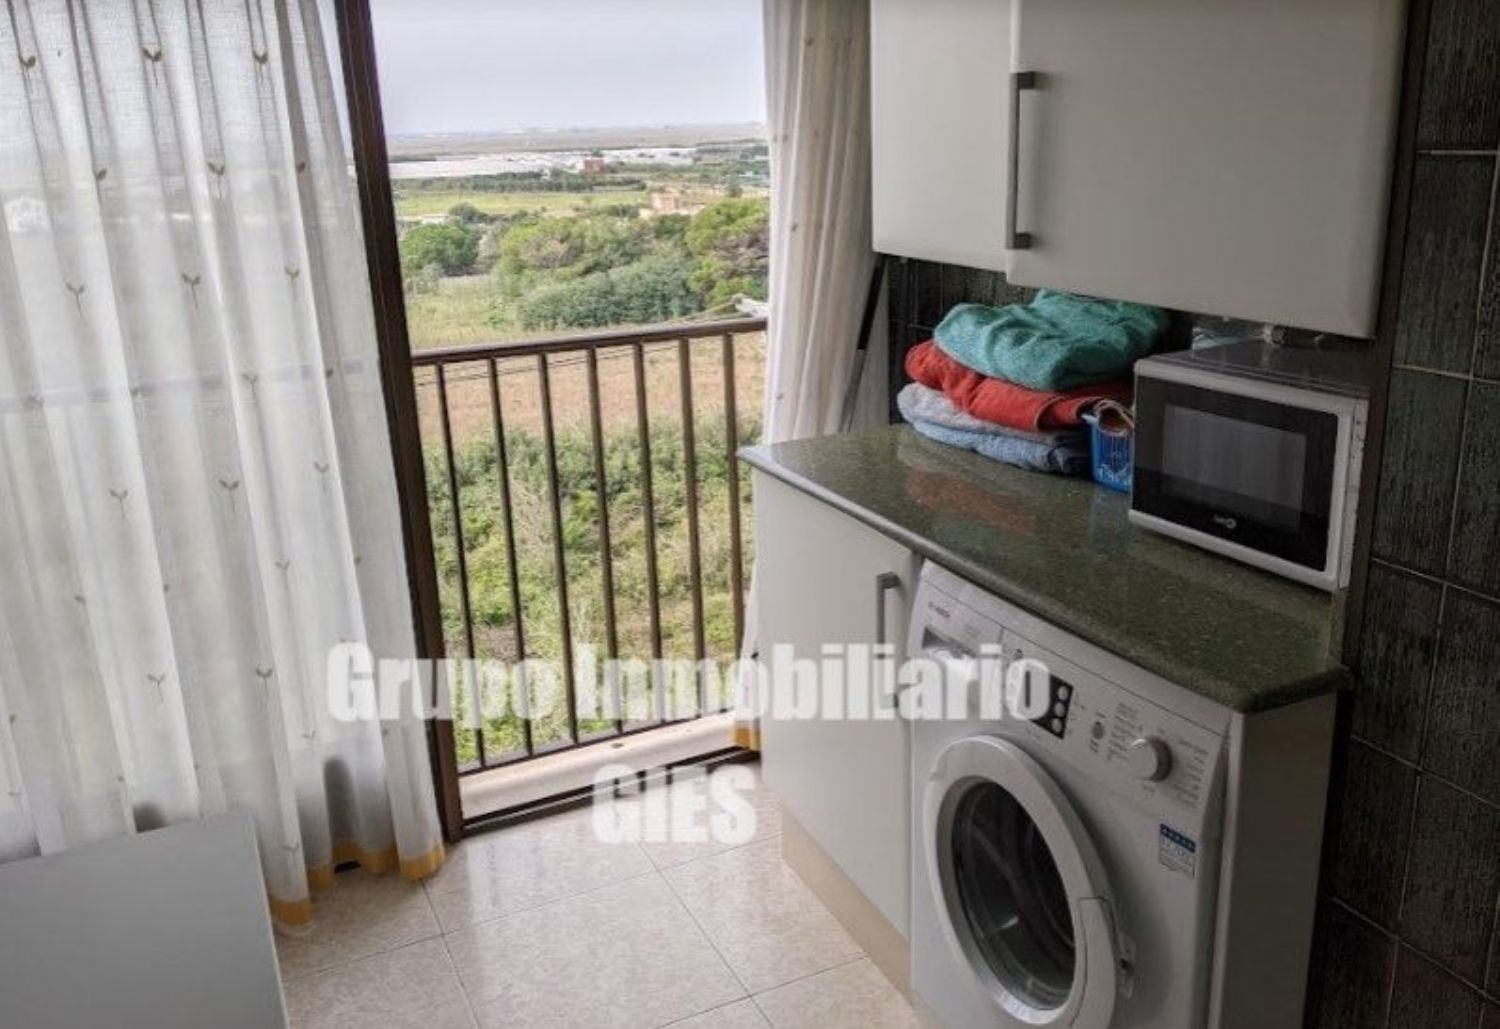 Apartment for sale on the seafront on Mar Blau N-01 street, in Sueca